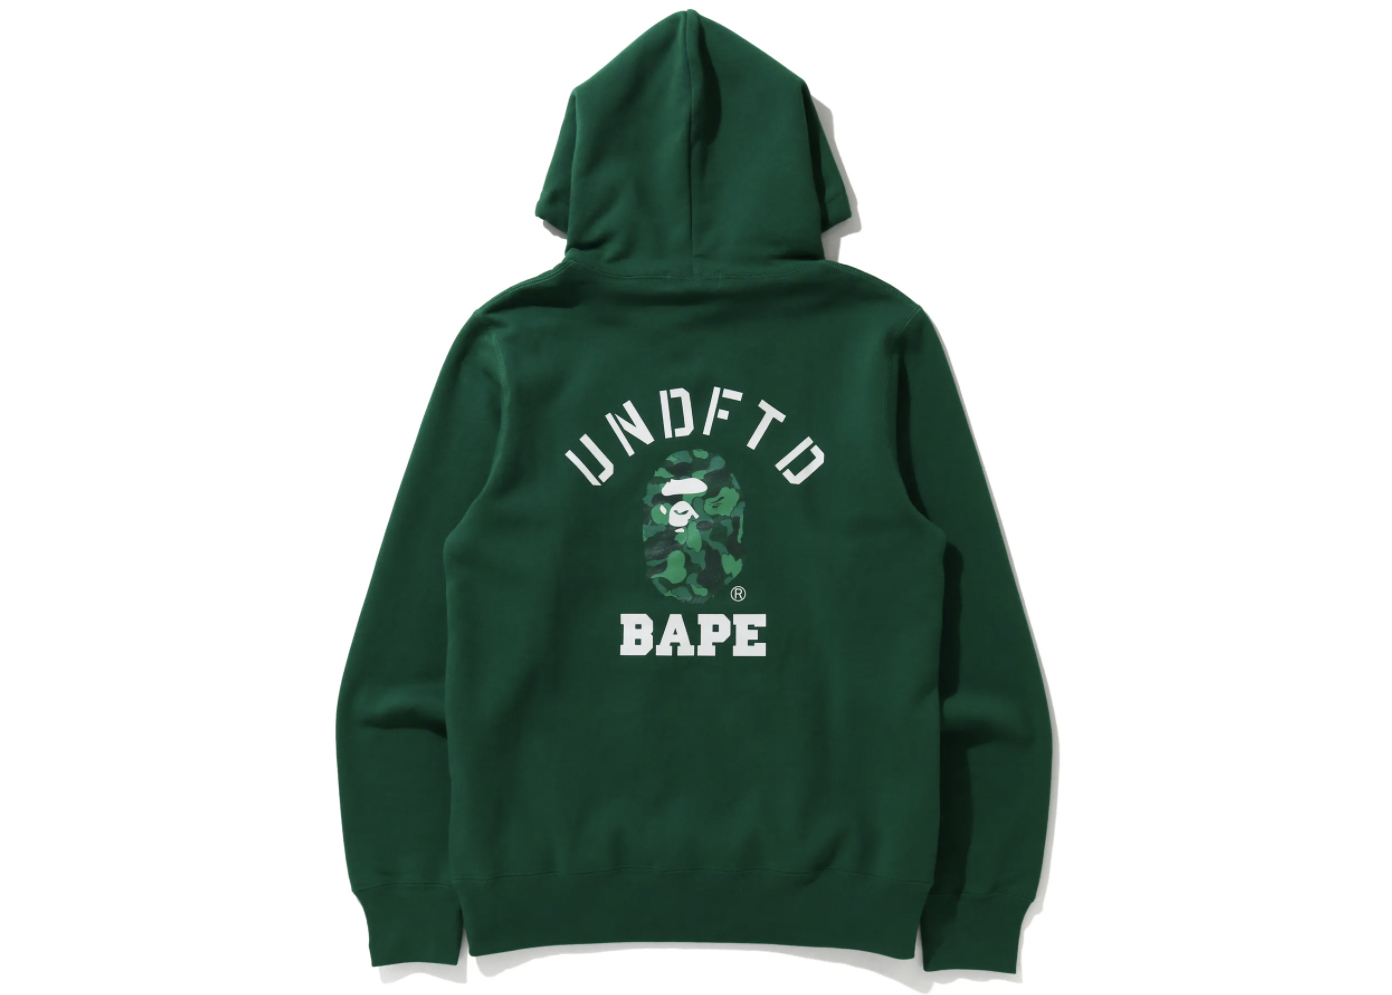 BAPE x Undefeated Pullover Hoodie Green Men's - FW20 - US